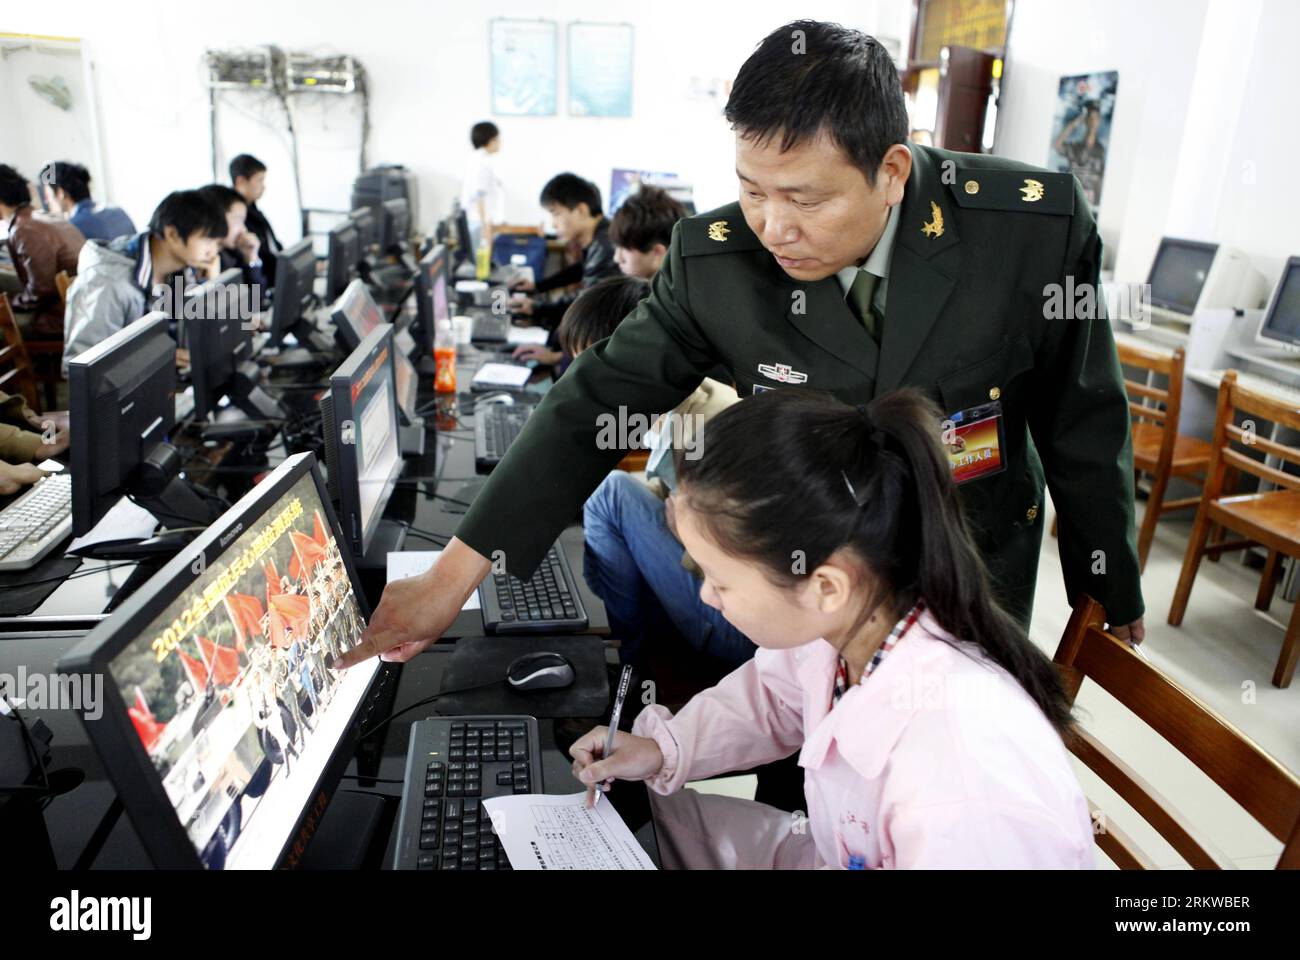 Bildnummer: 58657272  Datum: 01.11.2012  Copyright: imago/Xinhua (121101) -- DUCHANG, Nov. 1, 2012 (Xinhua) -- A young applicant checks her psychological test score for military recruitment in Duchang County of east China s Jiangxi Province, Nov. 1, 2012. China s People s Liberation Army started the yearly and nationwide winter recruitment on Thursday. (Xinhua/Fu Jianbin) (mcg) CHINA-WINTER MILITARY RECRUITMENT-STARTING (CN) PUBLICATIONxNOTxINxCHN Gesellschaft Armee Militär Musterung Rekrutierung Fotostory xas x0x 2012 quer      58657272 Date 01 11 2012 Copyright Imago XINHUA  DUCHANG Nov 1 20 Stock Photo